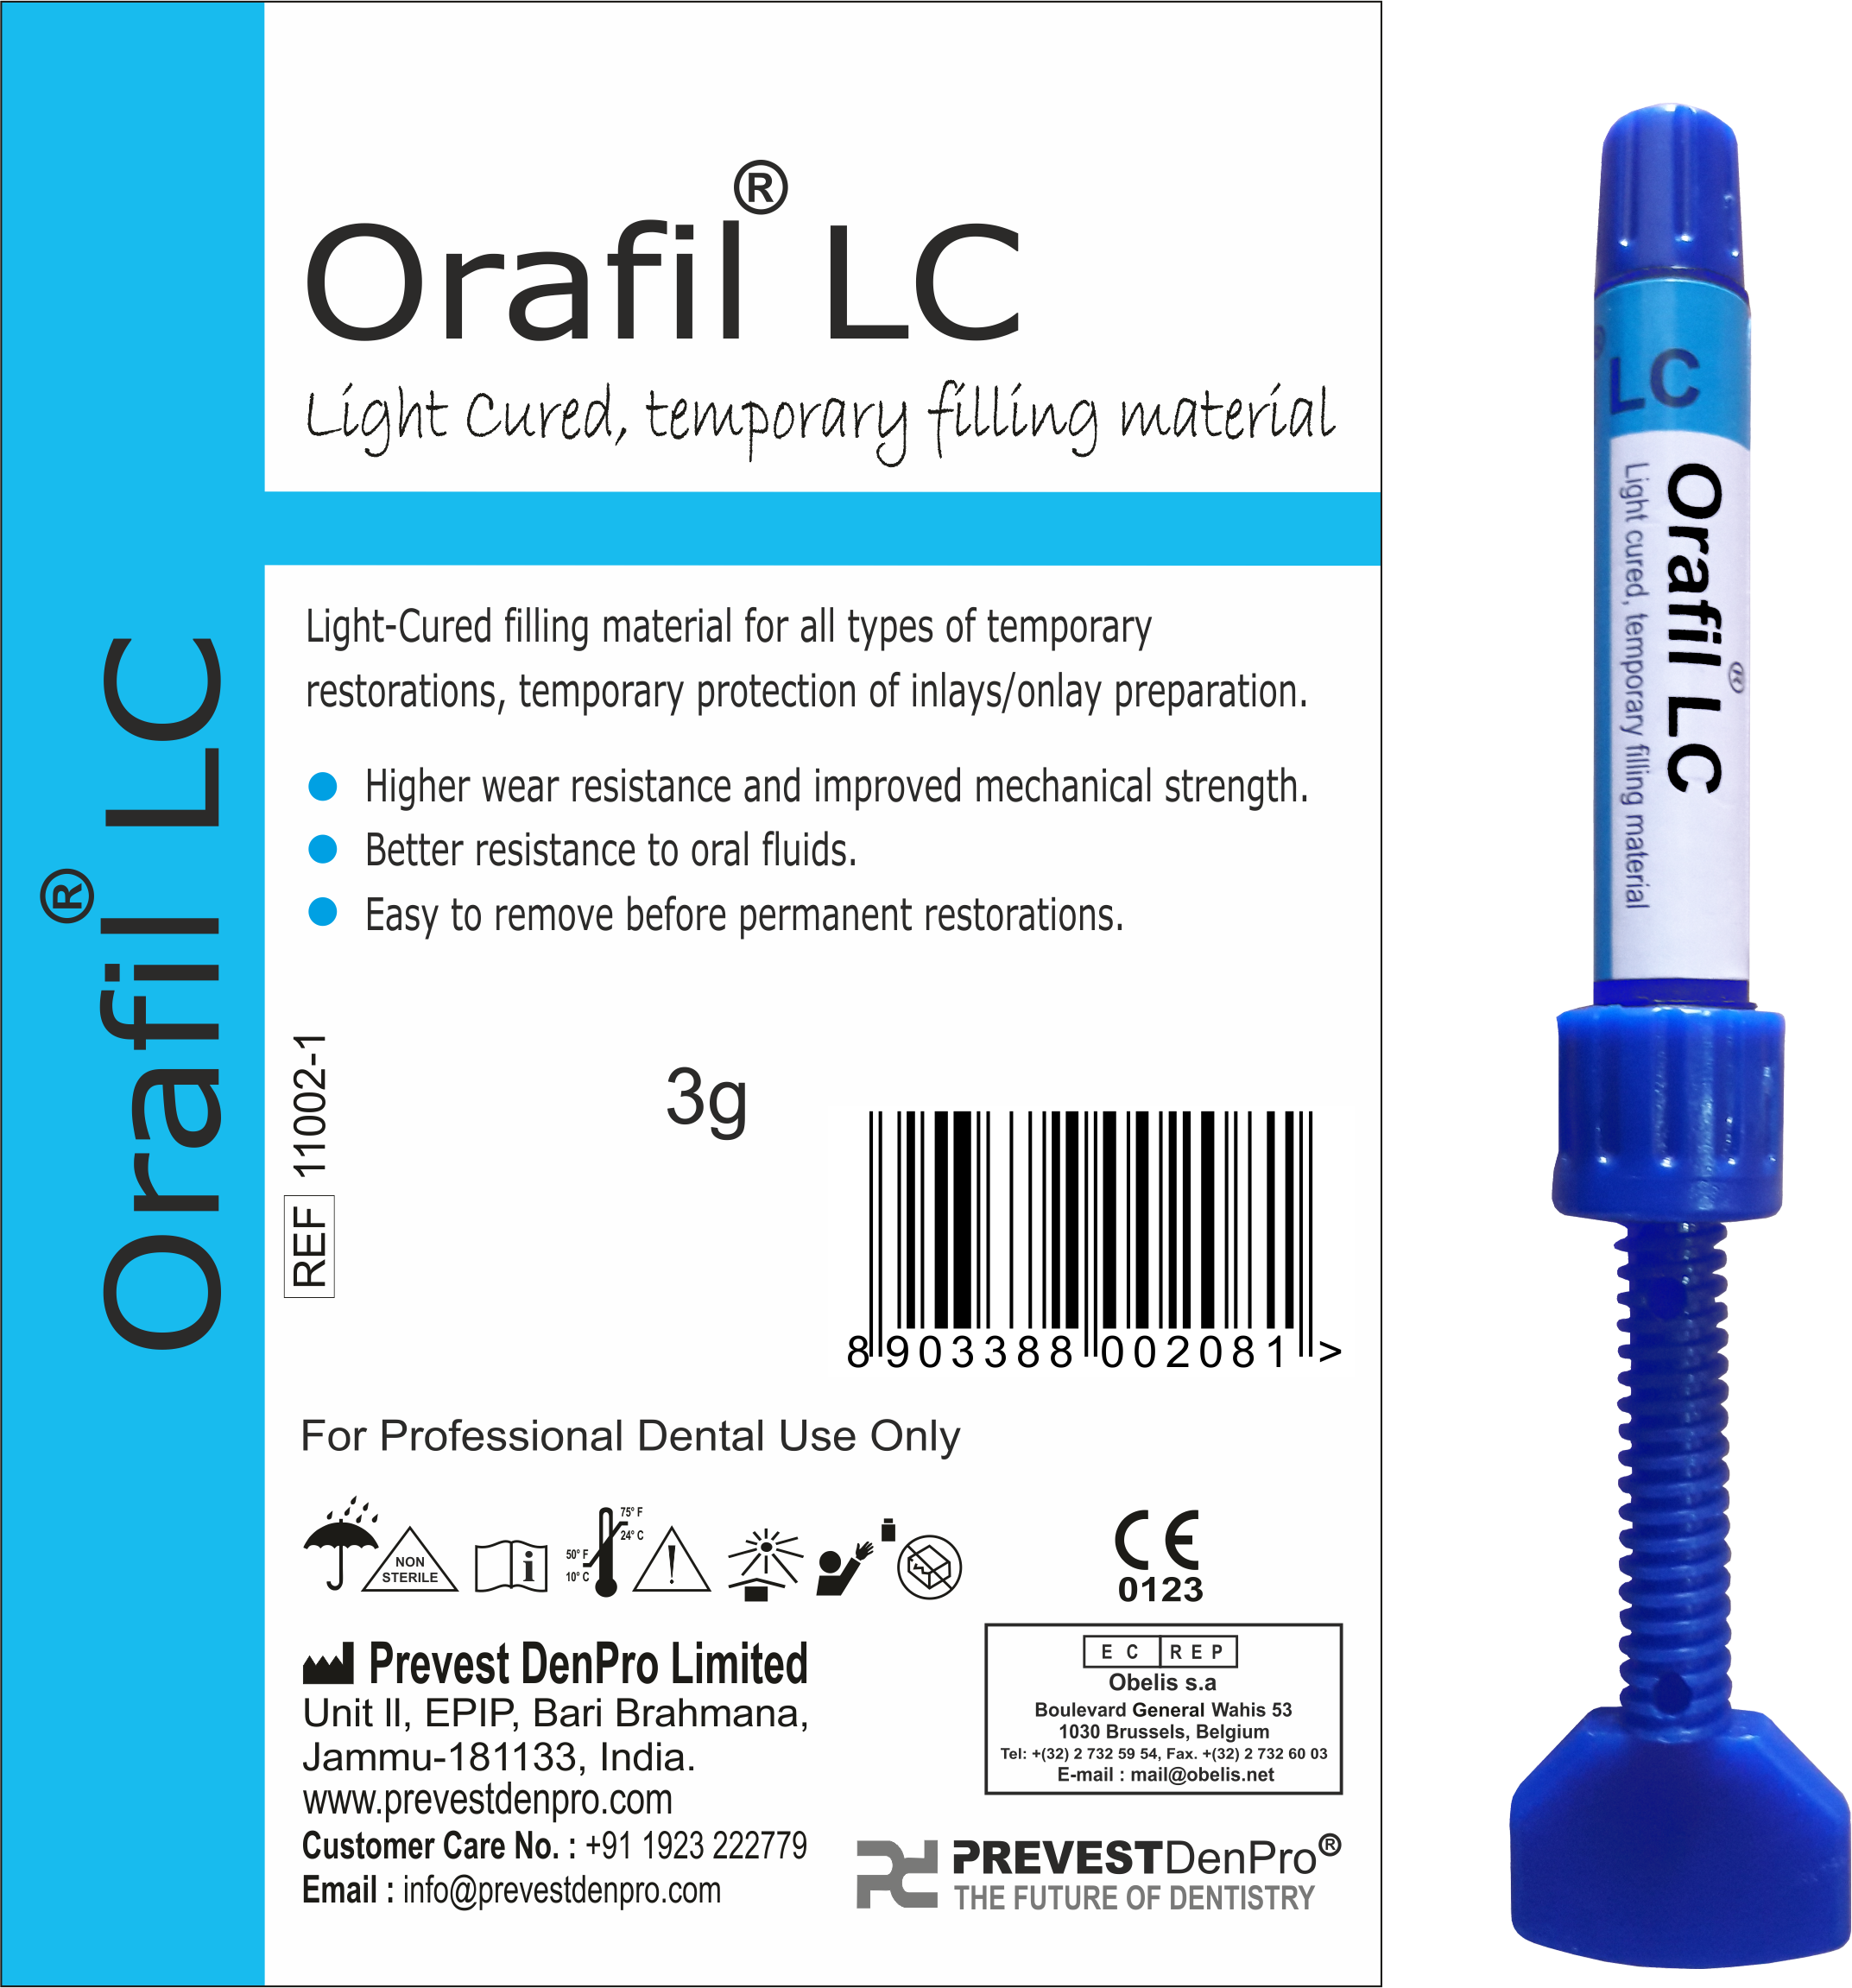 Orafil LC
(Light Cured, Temporary Filling Material)